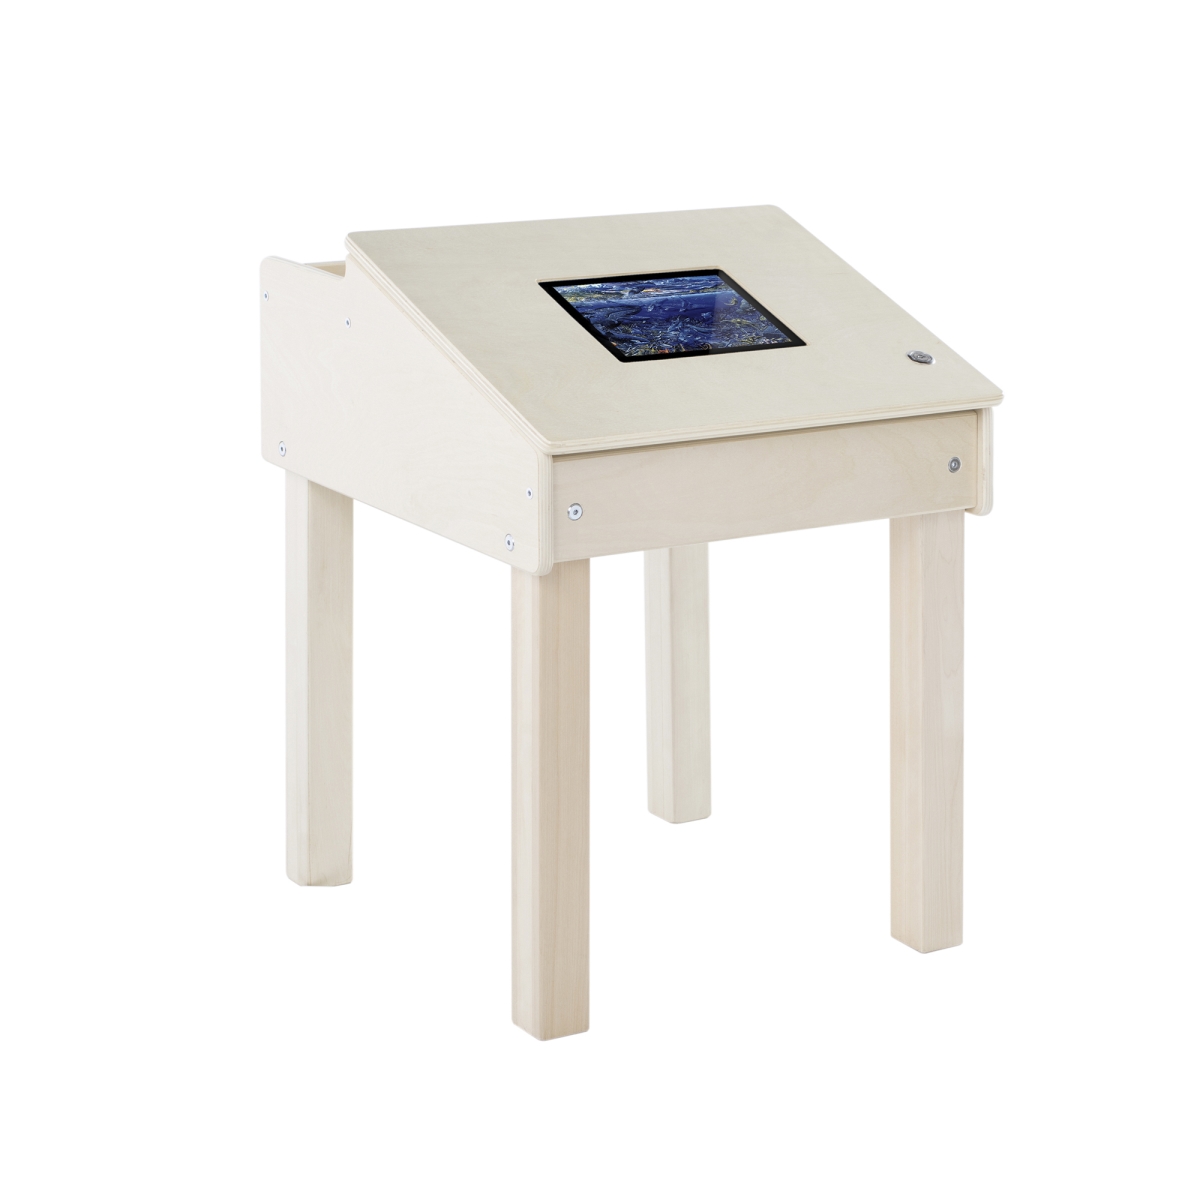 G6348 19 X 19 X 26 In. Single Tablet Table